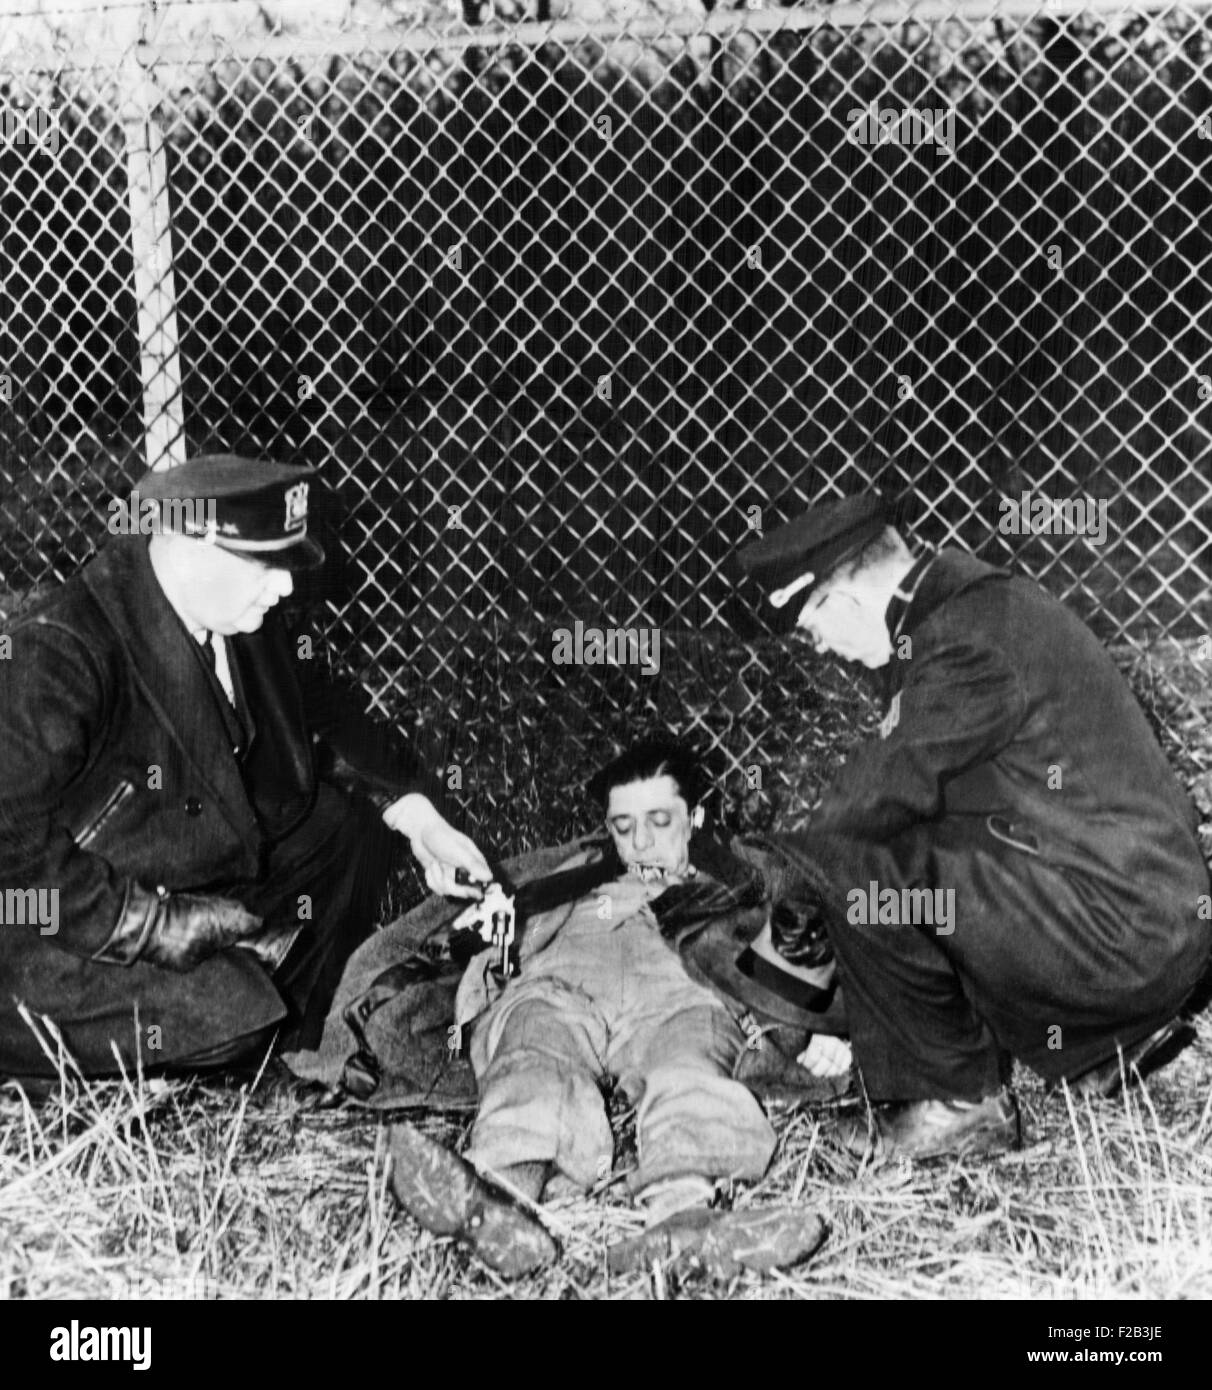 Police next the to dead body of Frank 'The Enforcer' Nitti. He committed suicide beside a railroad track near Riverside, a Chicago suburb, following his indictment for extortion. March 19, 1943. He was portrayed by Sylvester Stallone in CAPONE 1975; by Stanley Tucci in ROAD TO PERDITION 2002; and by Bill Camp in PUBLIC ENEMIES 2009 . - (CSU 2015 6 183) Stock Photo